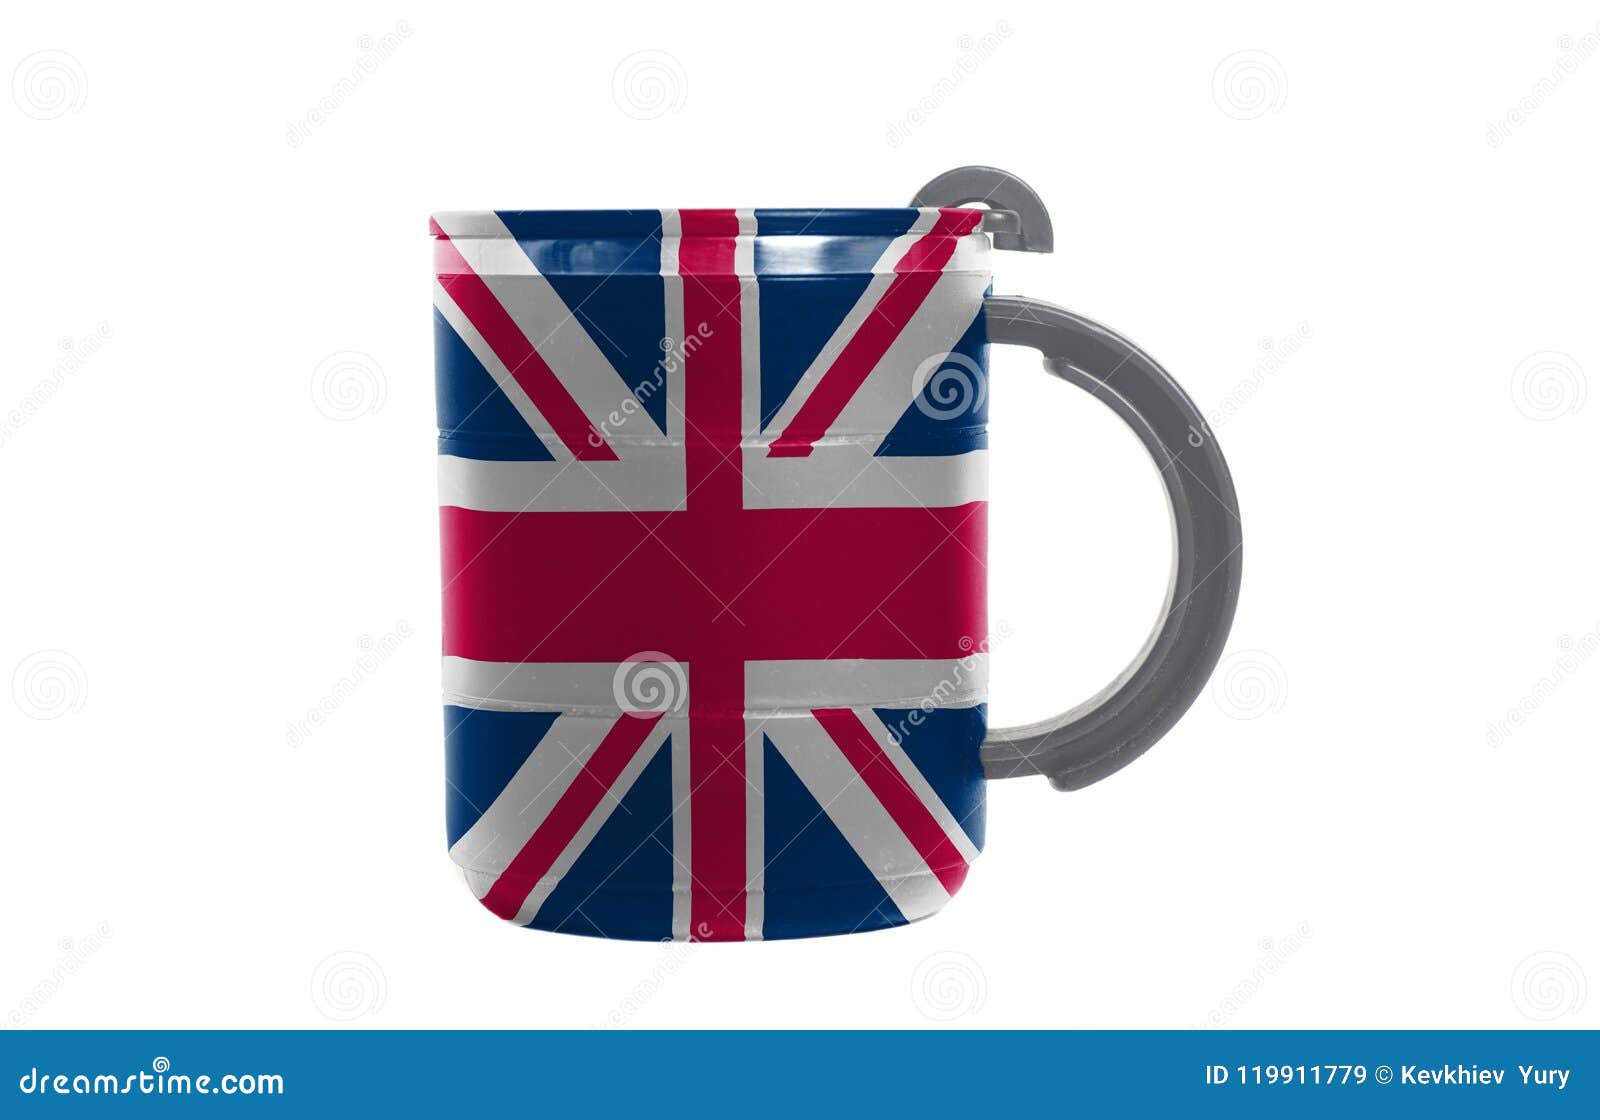 UK Independence Day Brexit Mug England Flag 31st January 2020 UKs Exit from the European Union Tea Coffee Mugs #Brexit